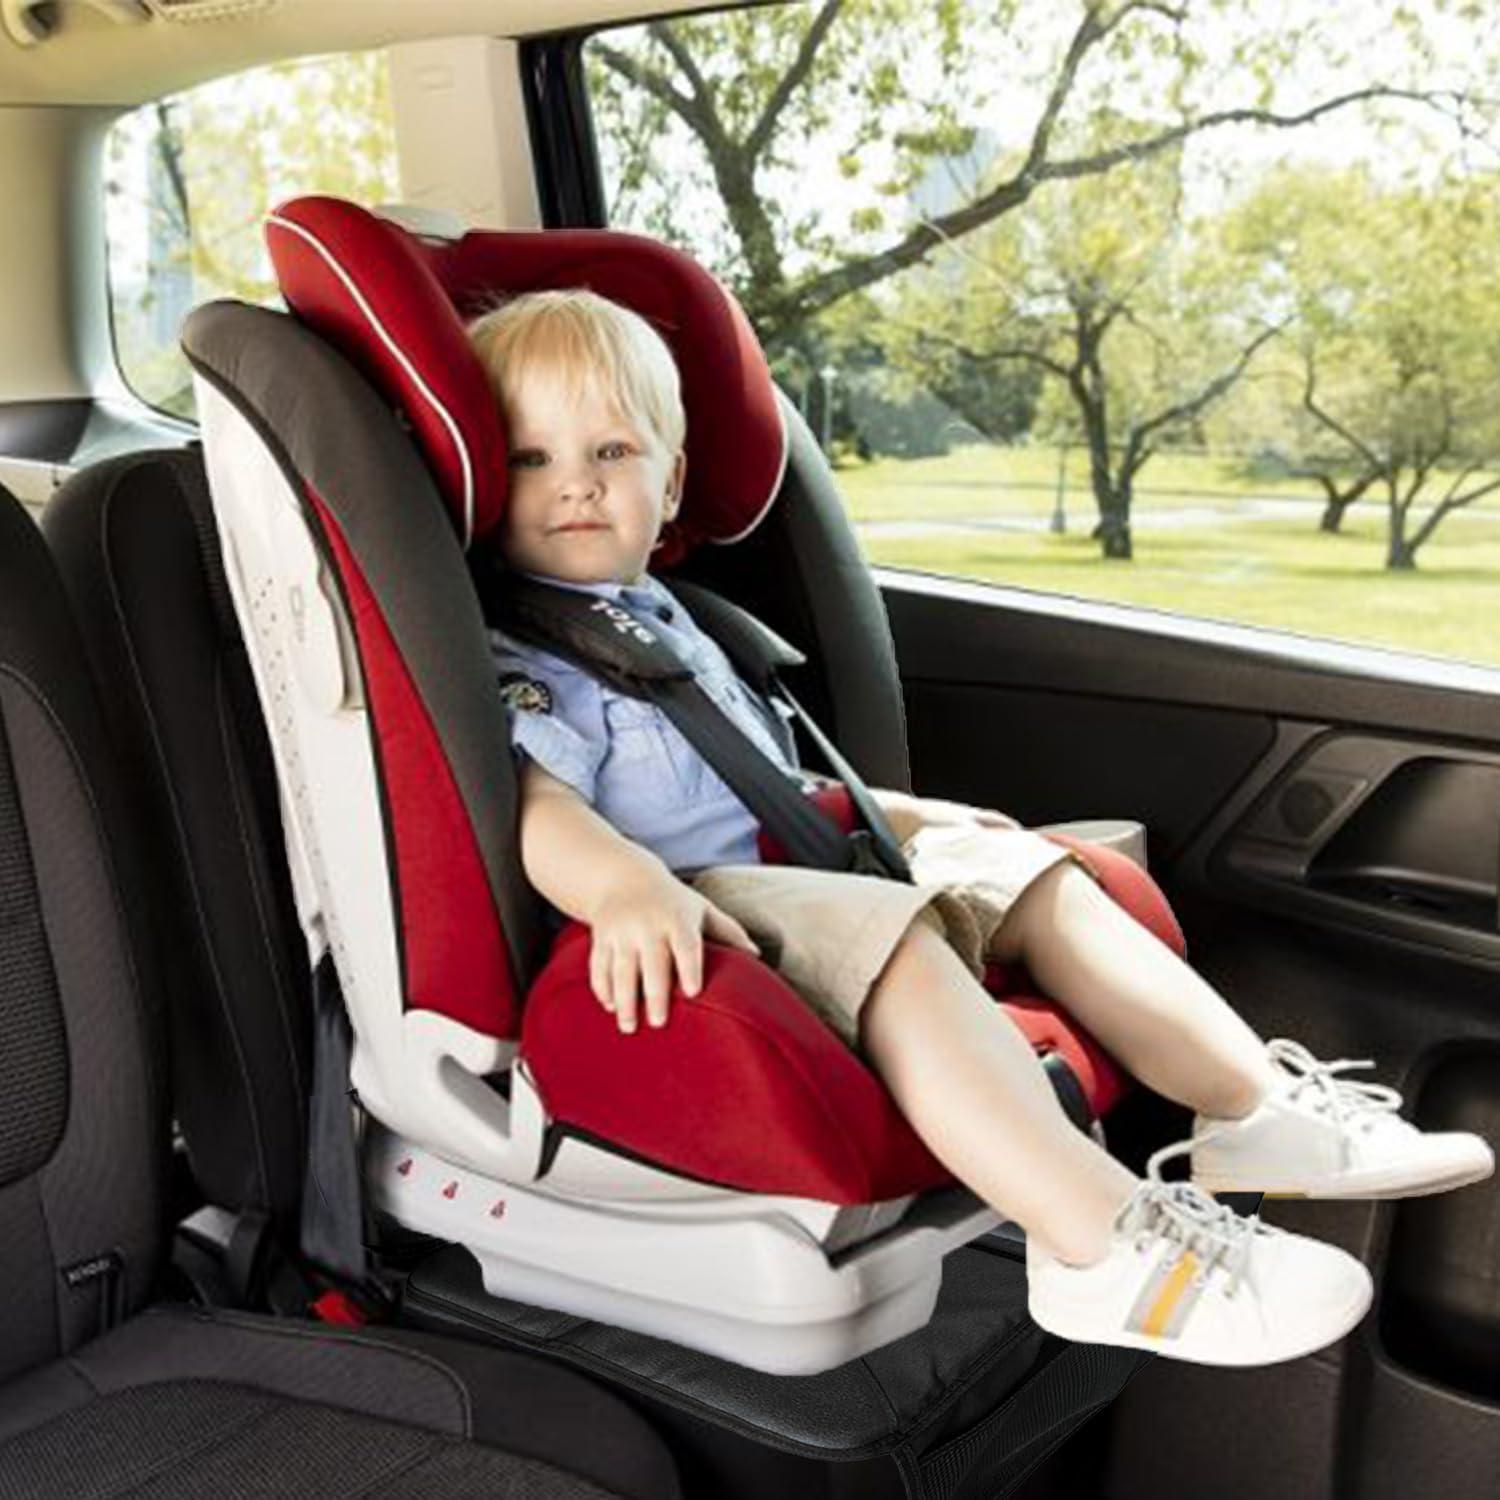 Waterproof car seat protector for busy parents with muddy kids – Soccersac